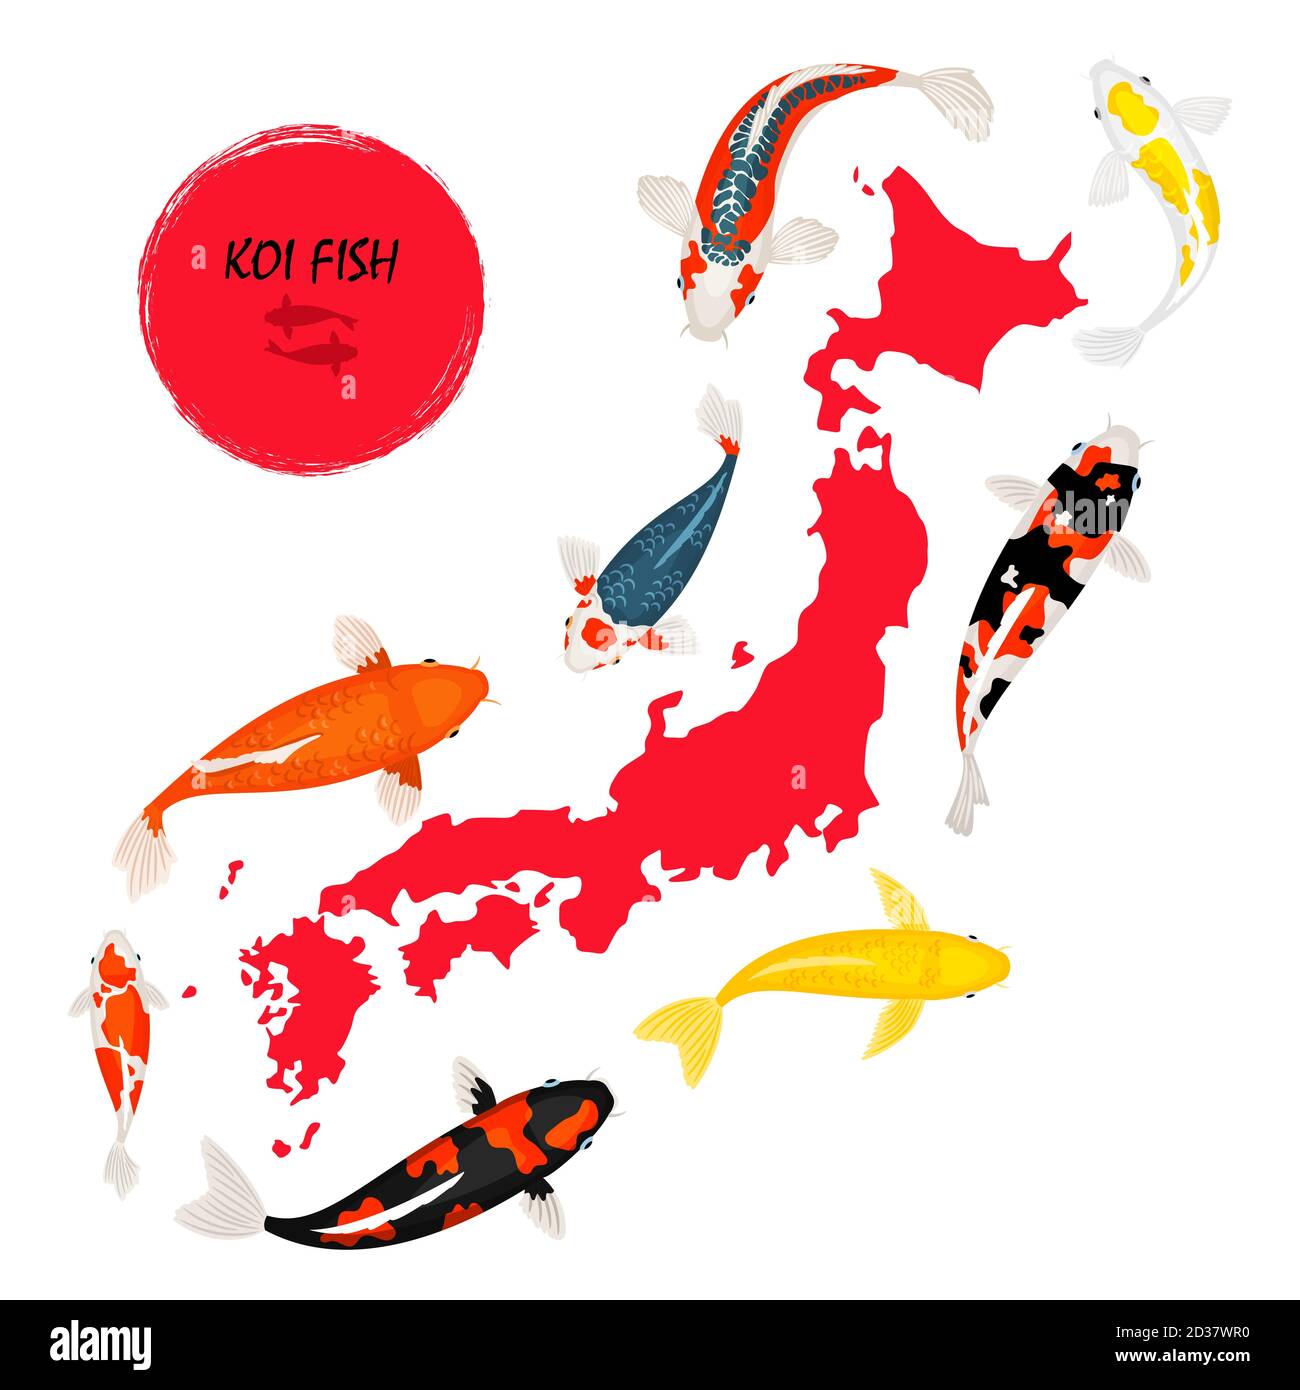 Koi fish and map of Japan on white background, vector illustration Stock Vector